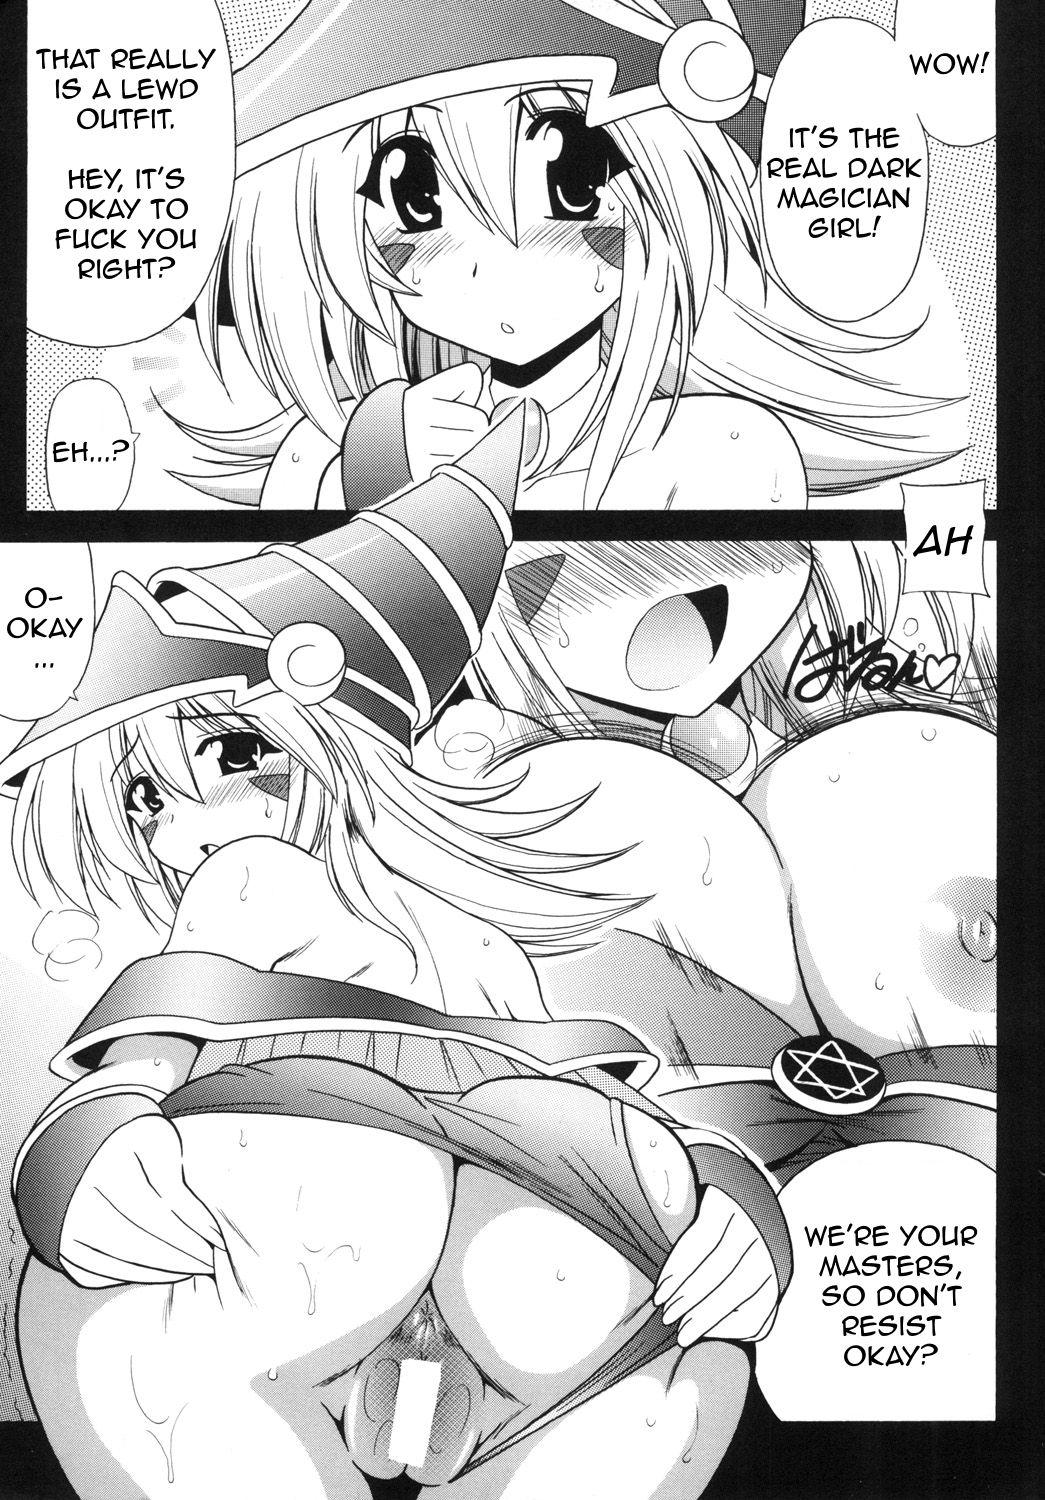 Rough Fuck BMG to Ecchi Shiyou ♡ | Let's Have Sex with Dark Magician Girl ♡ - Yu-gi-oh Glamcore - Page 3